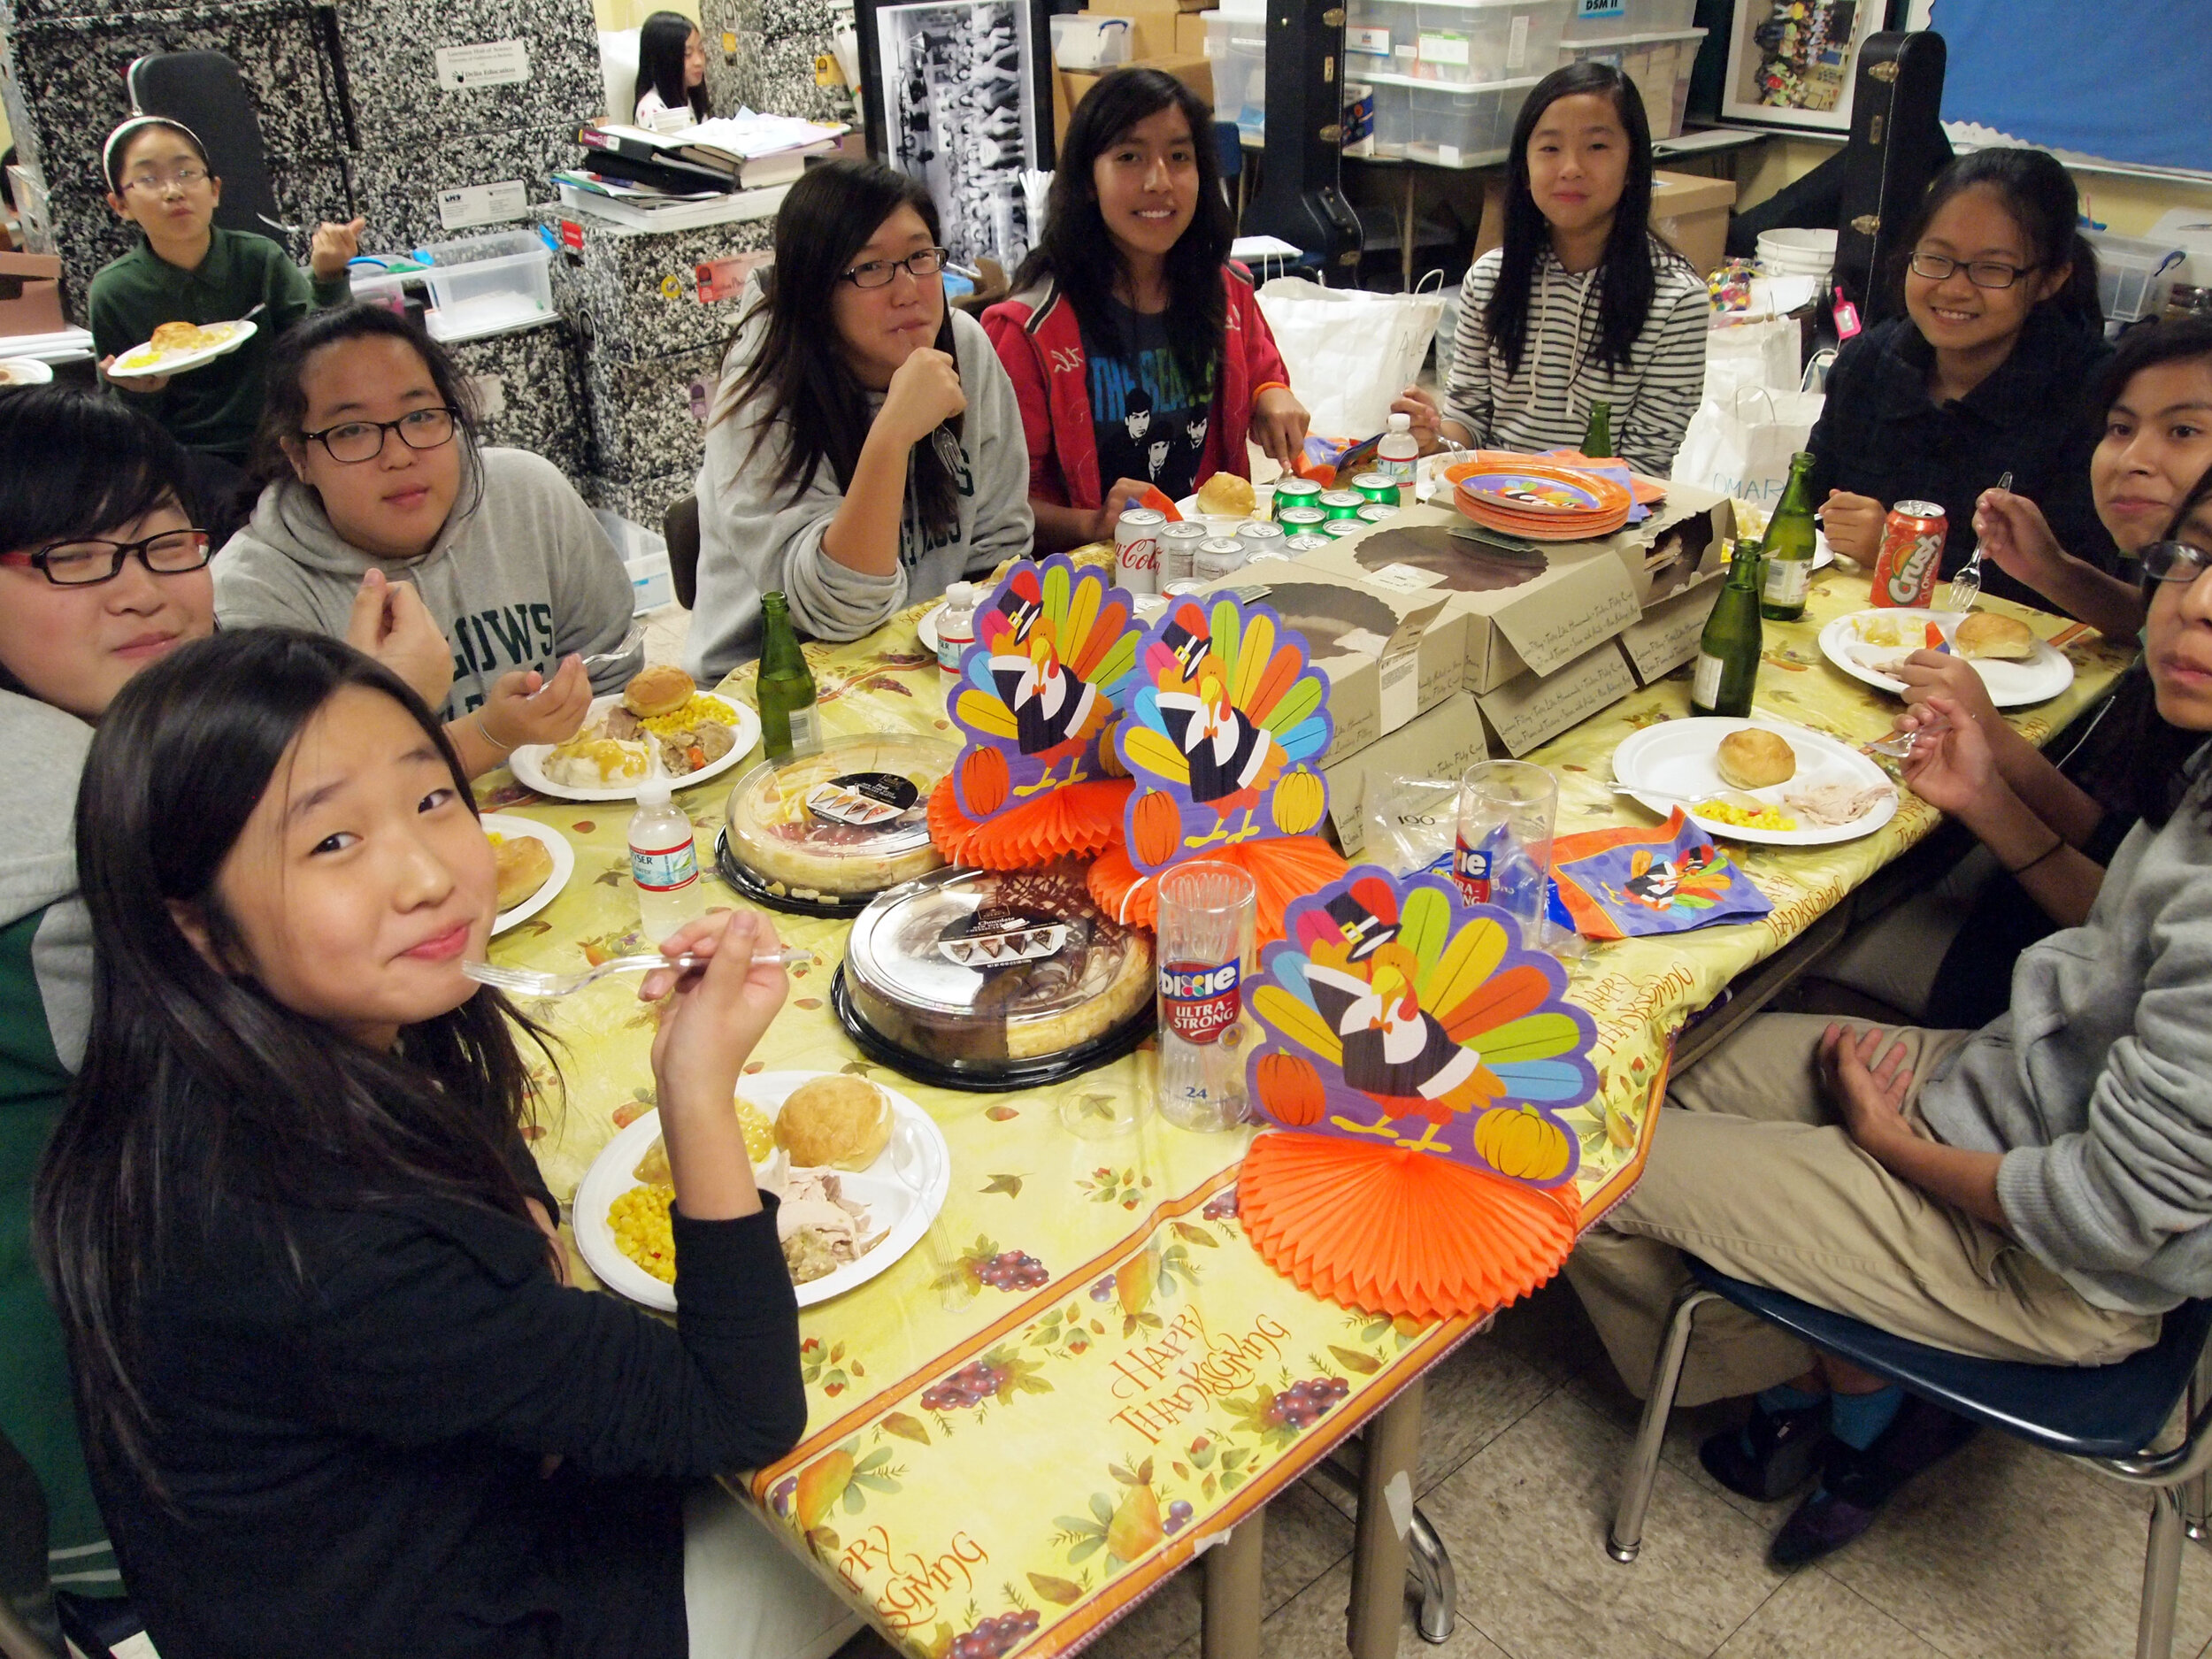  Older Students Return to Serve the Young Ones (and eat!) 